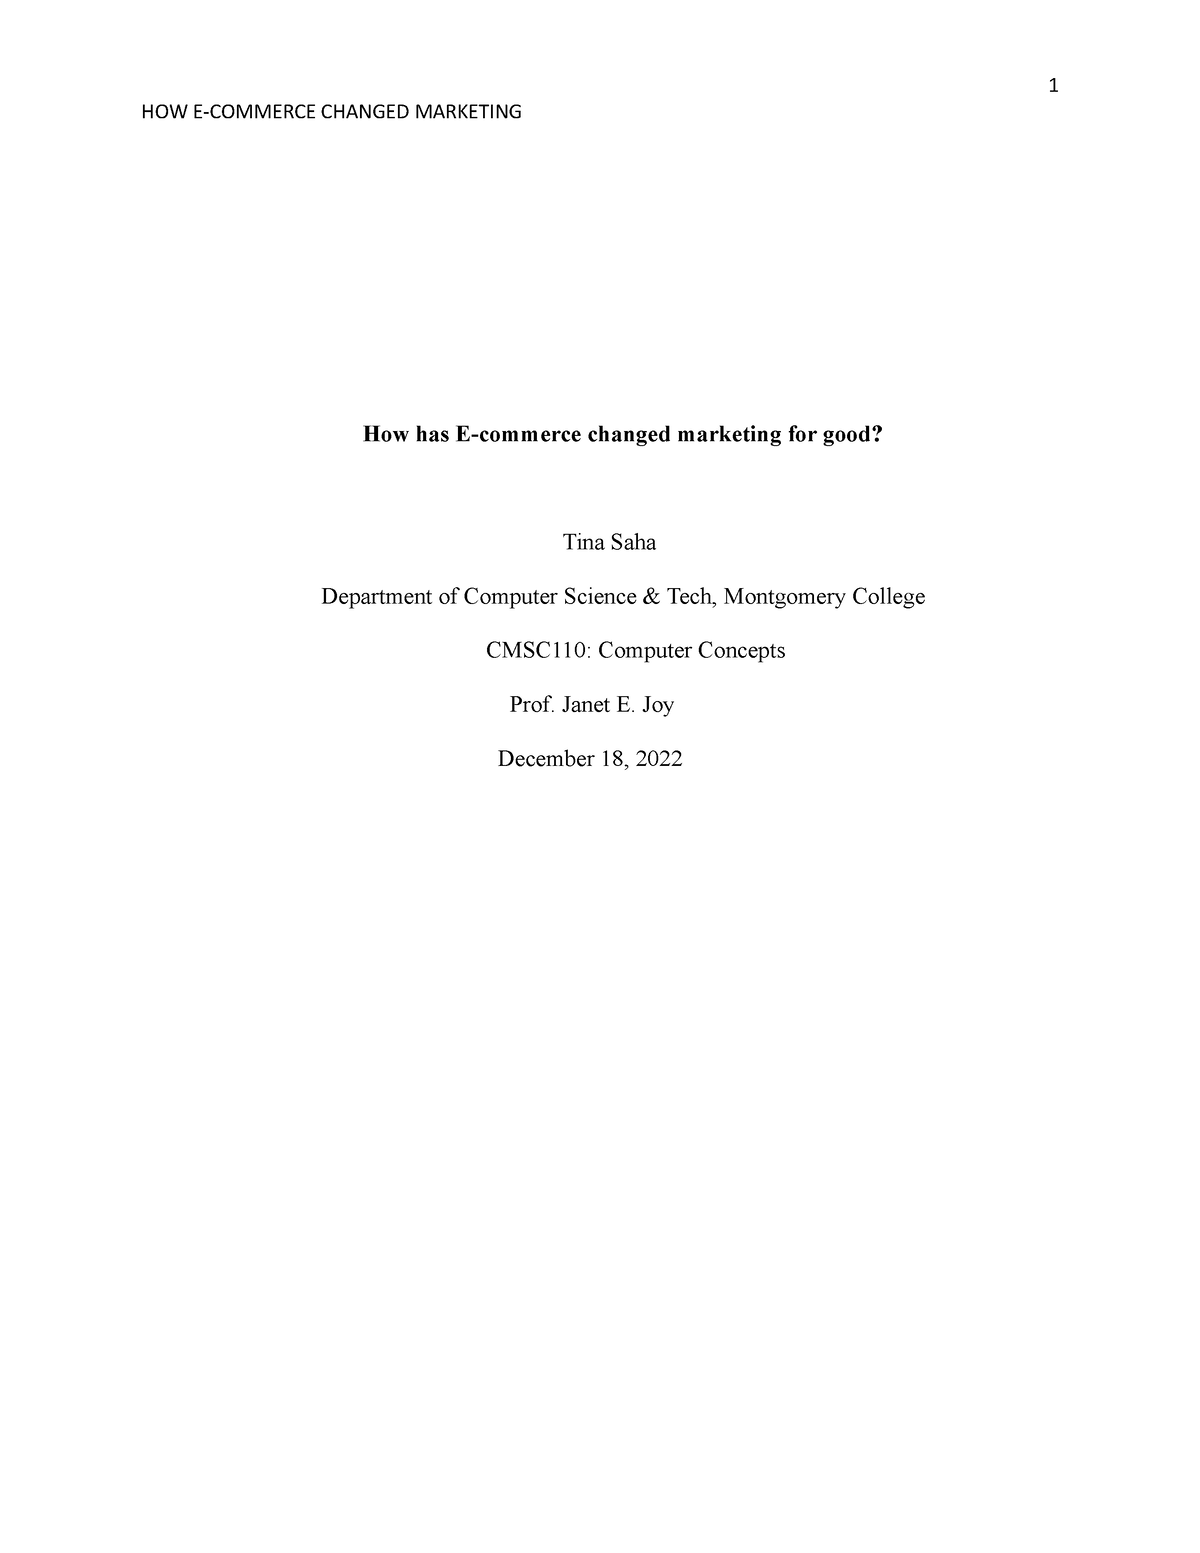 Computer Concept Paper - How has E-commerce changed marketing for good ...